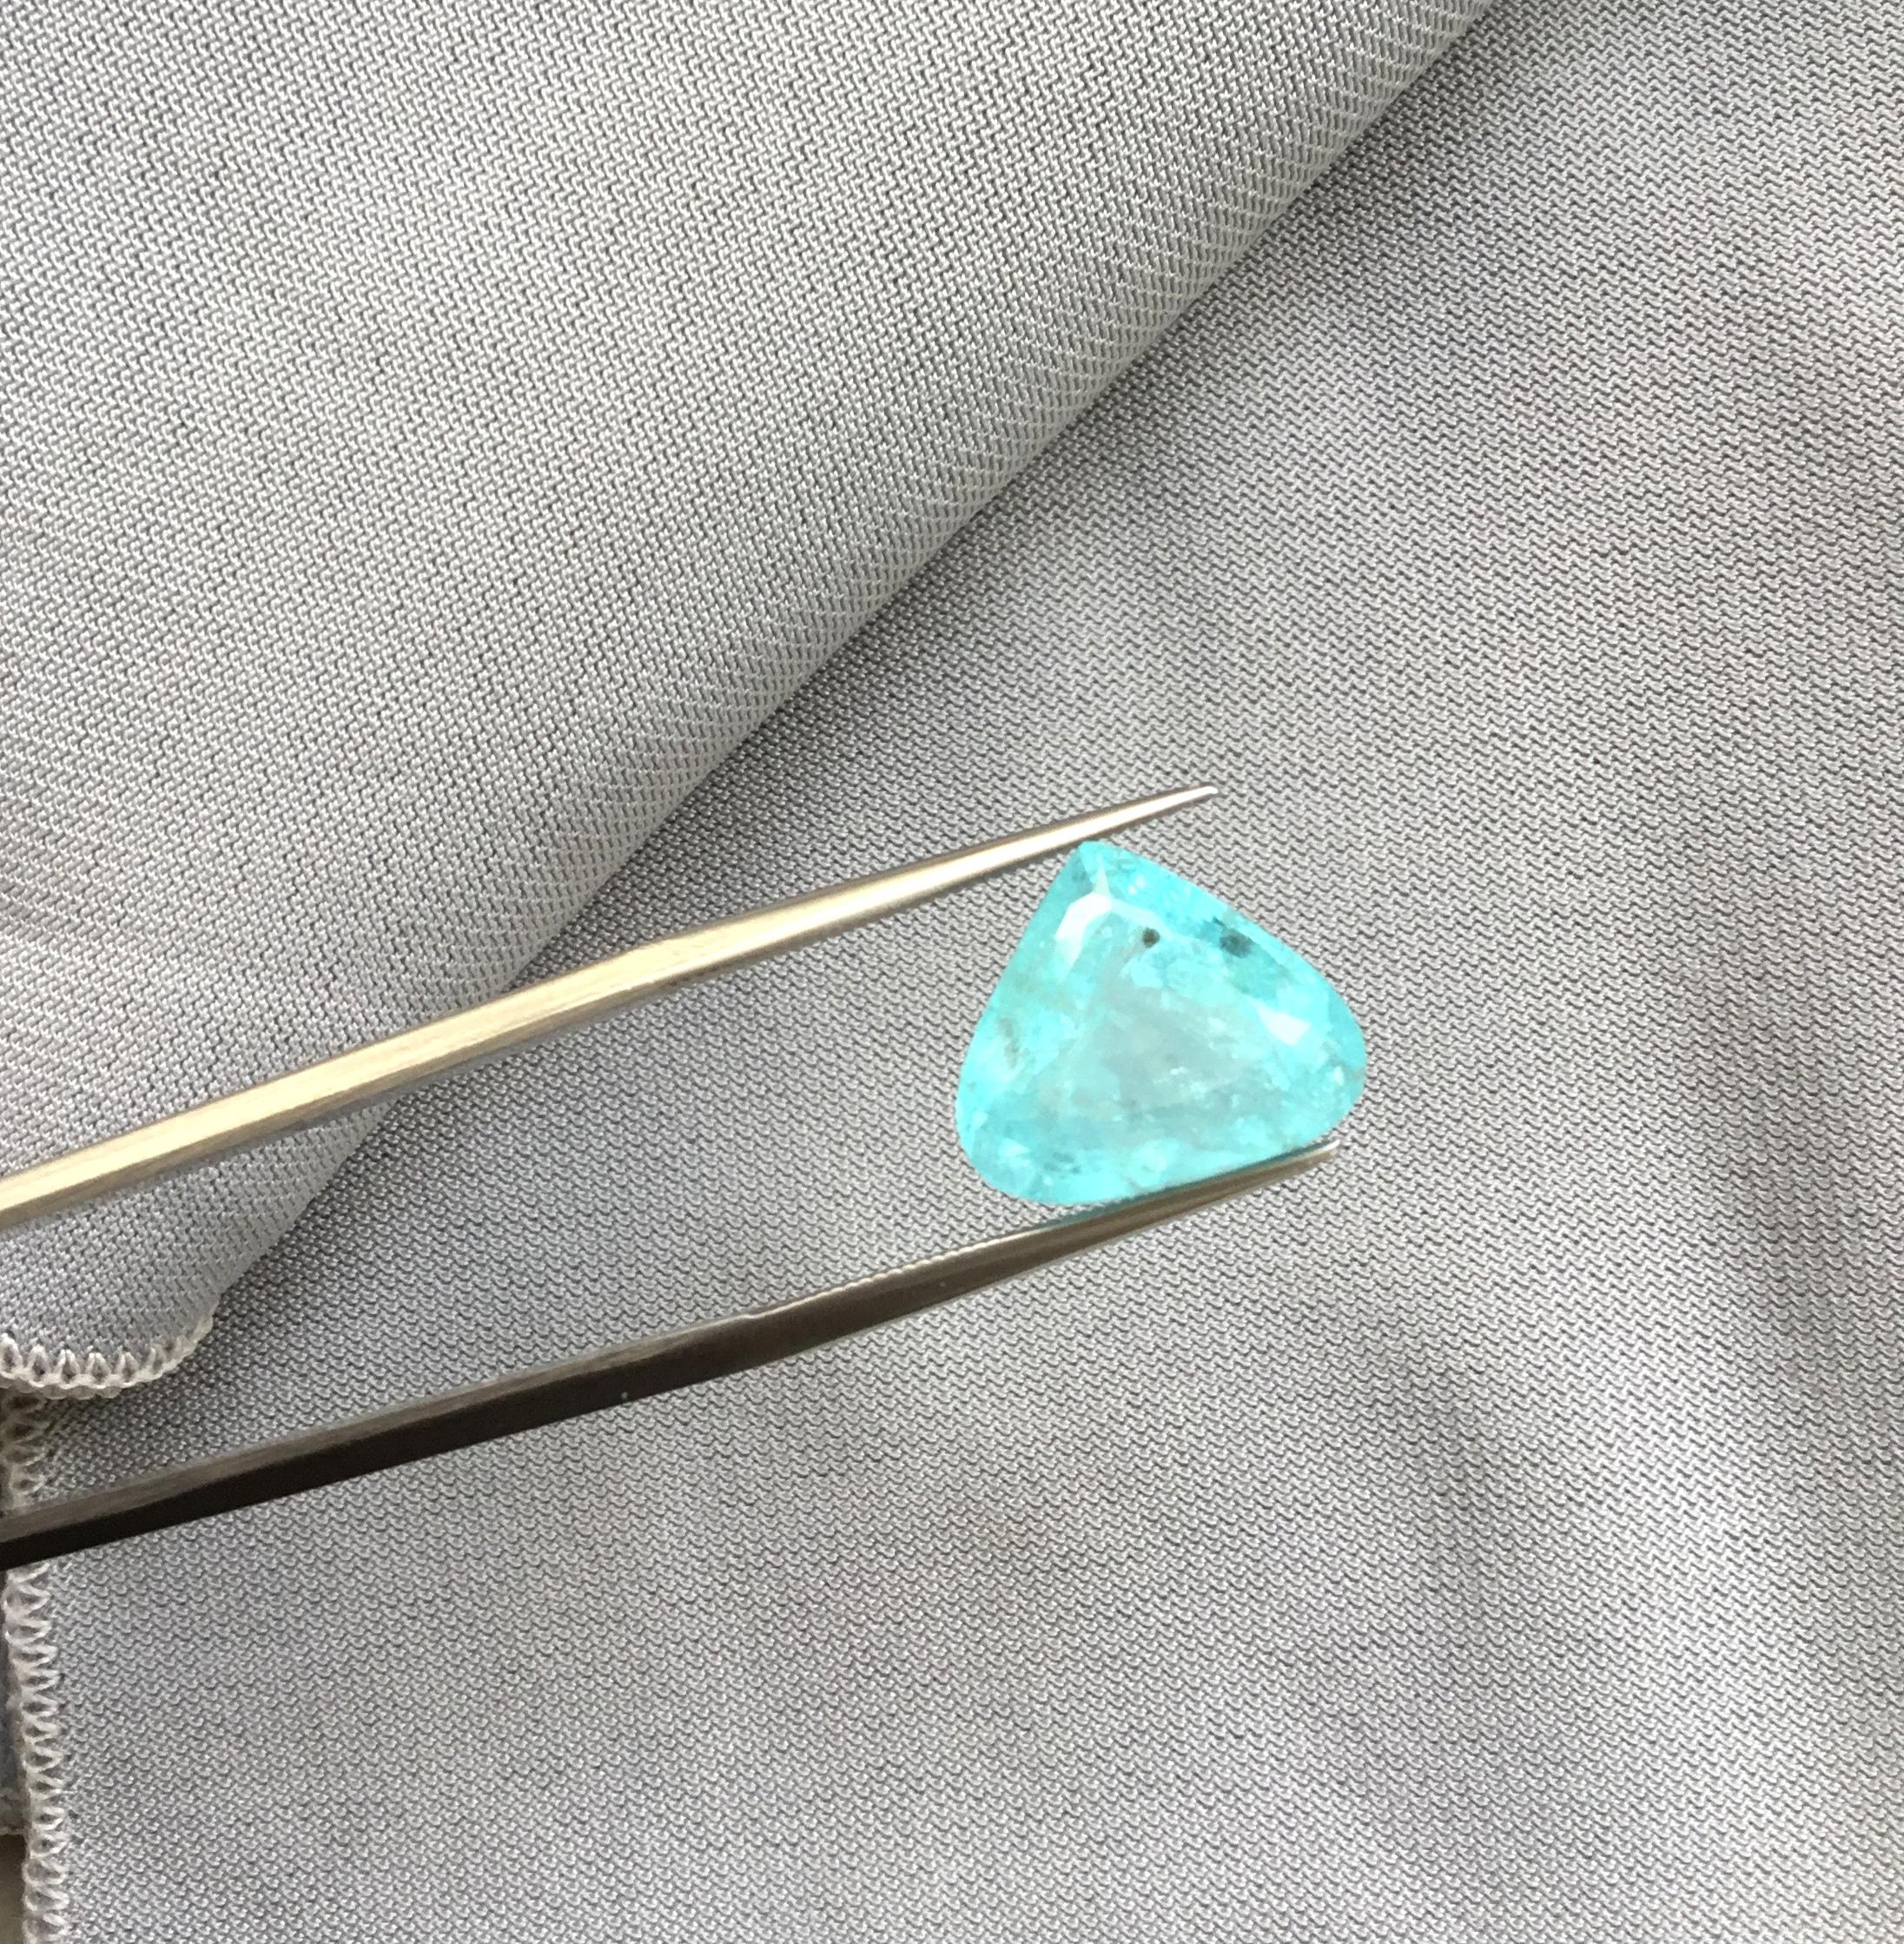 Exceptional 8.25 Carats Paraiba Tourmaline Pear Cut Stone for Fine Jewelry